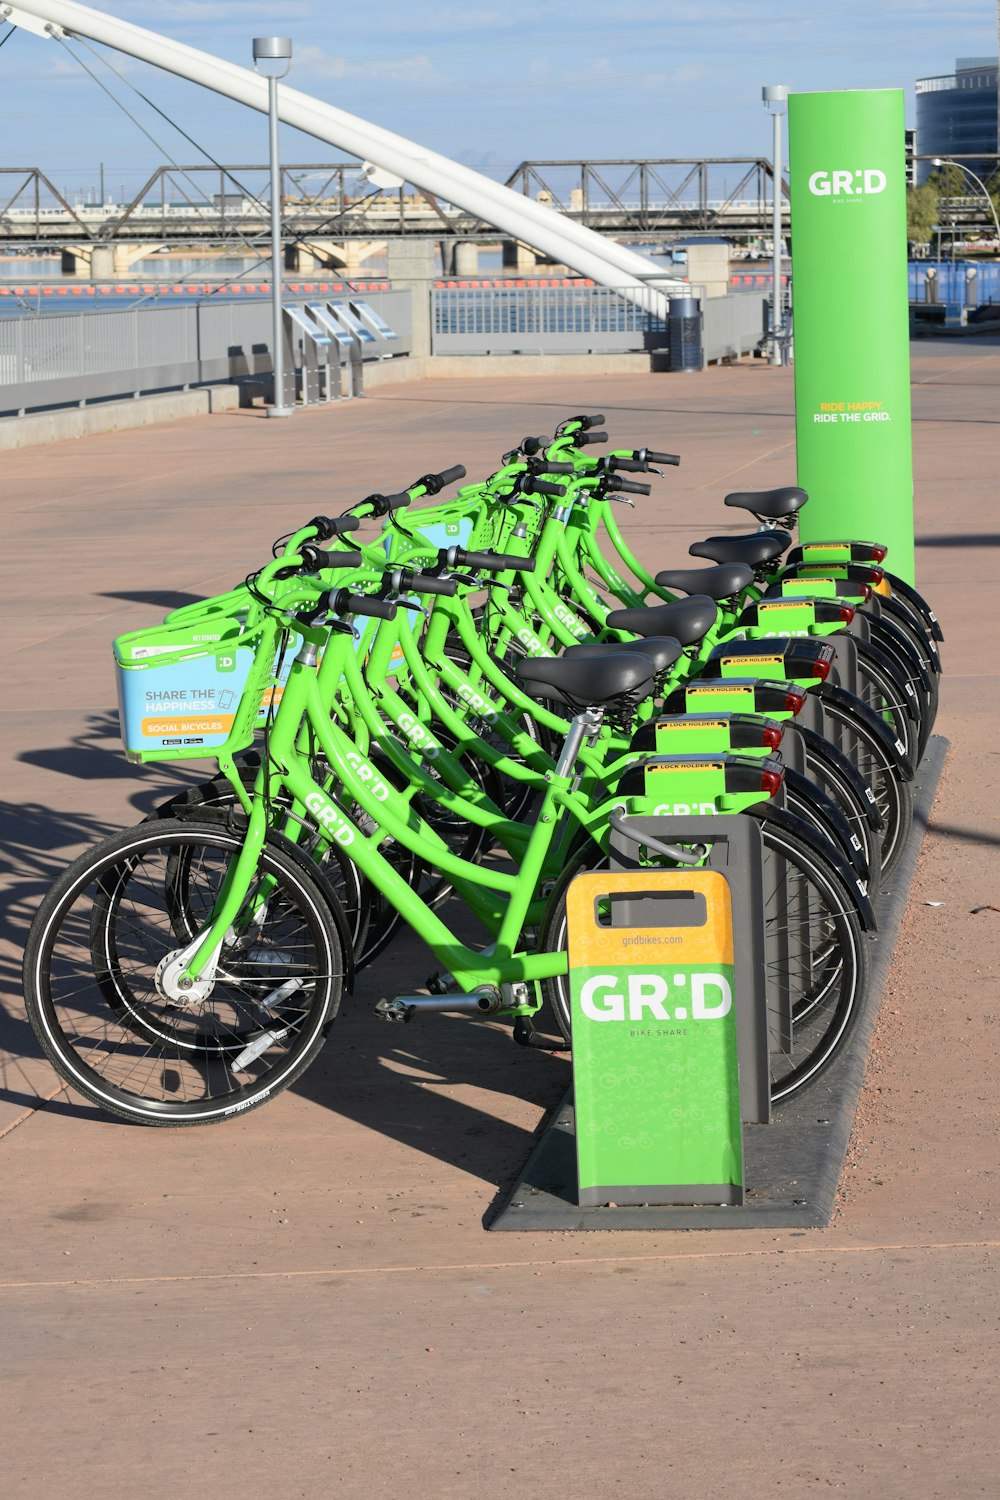 green bicycle parks near GRD post at daytime